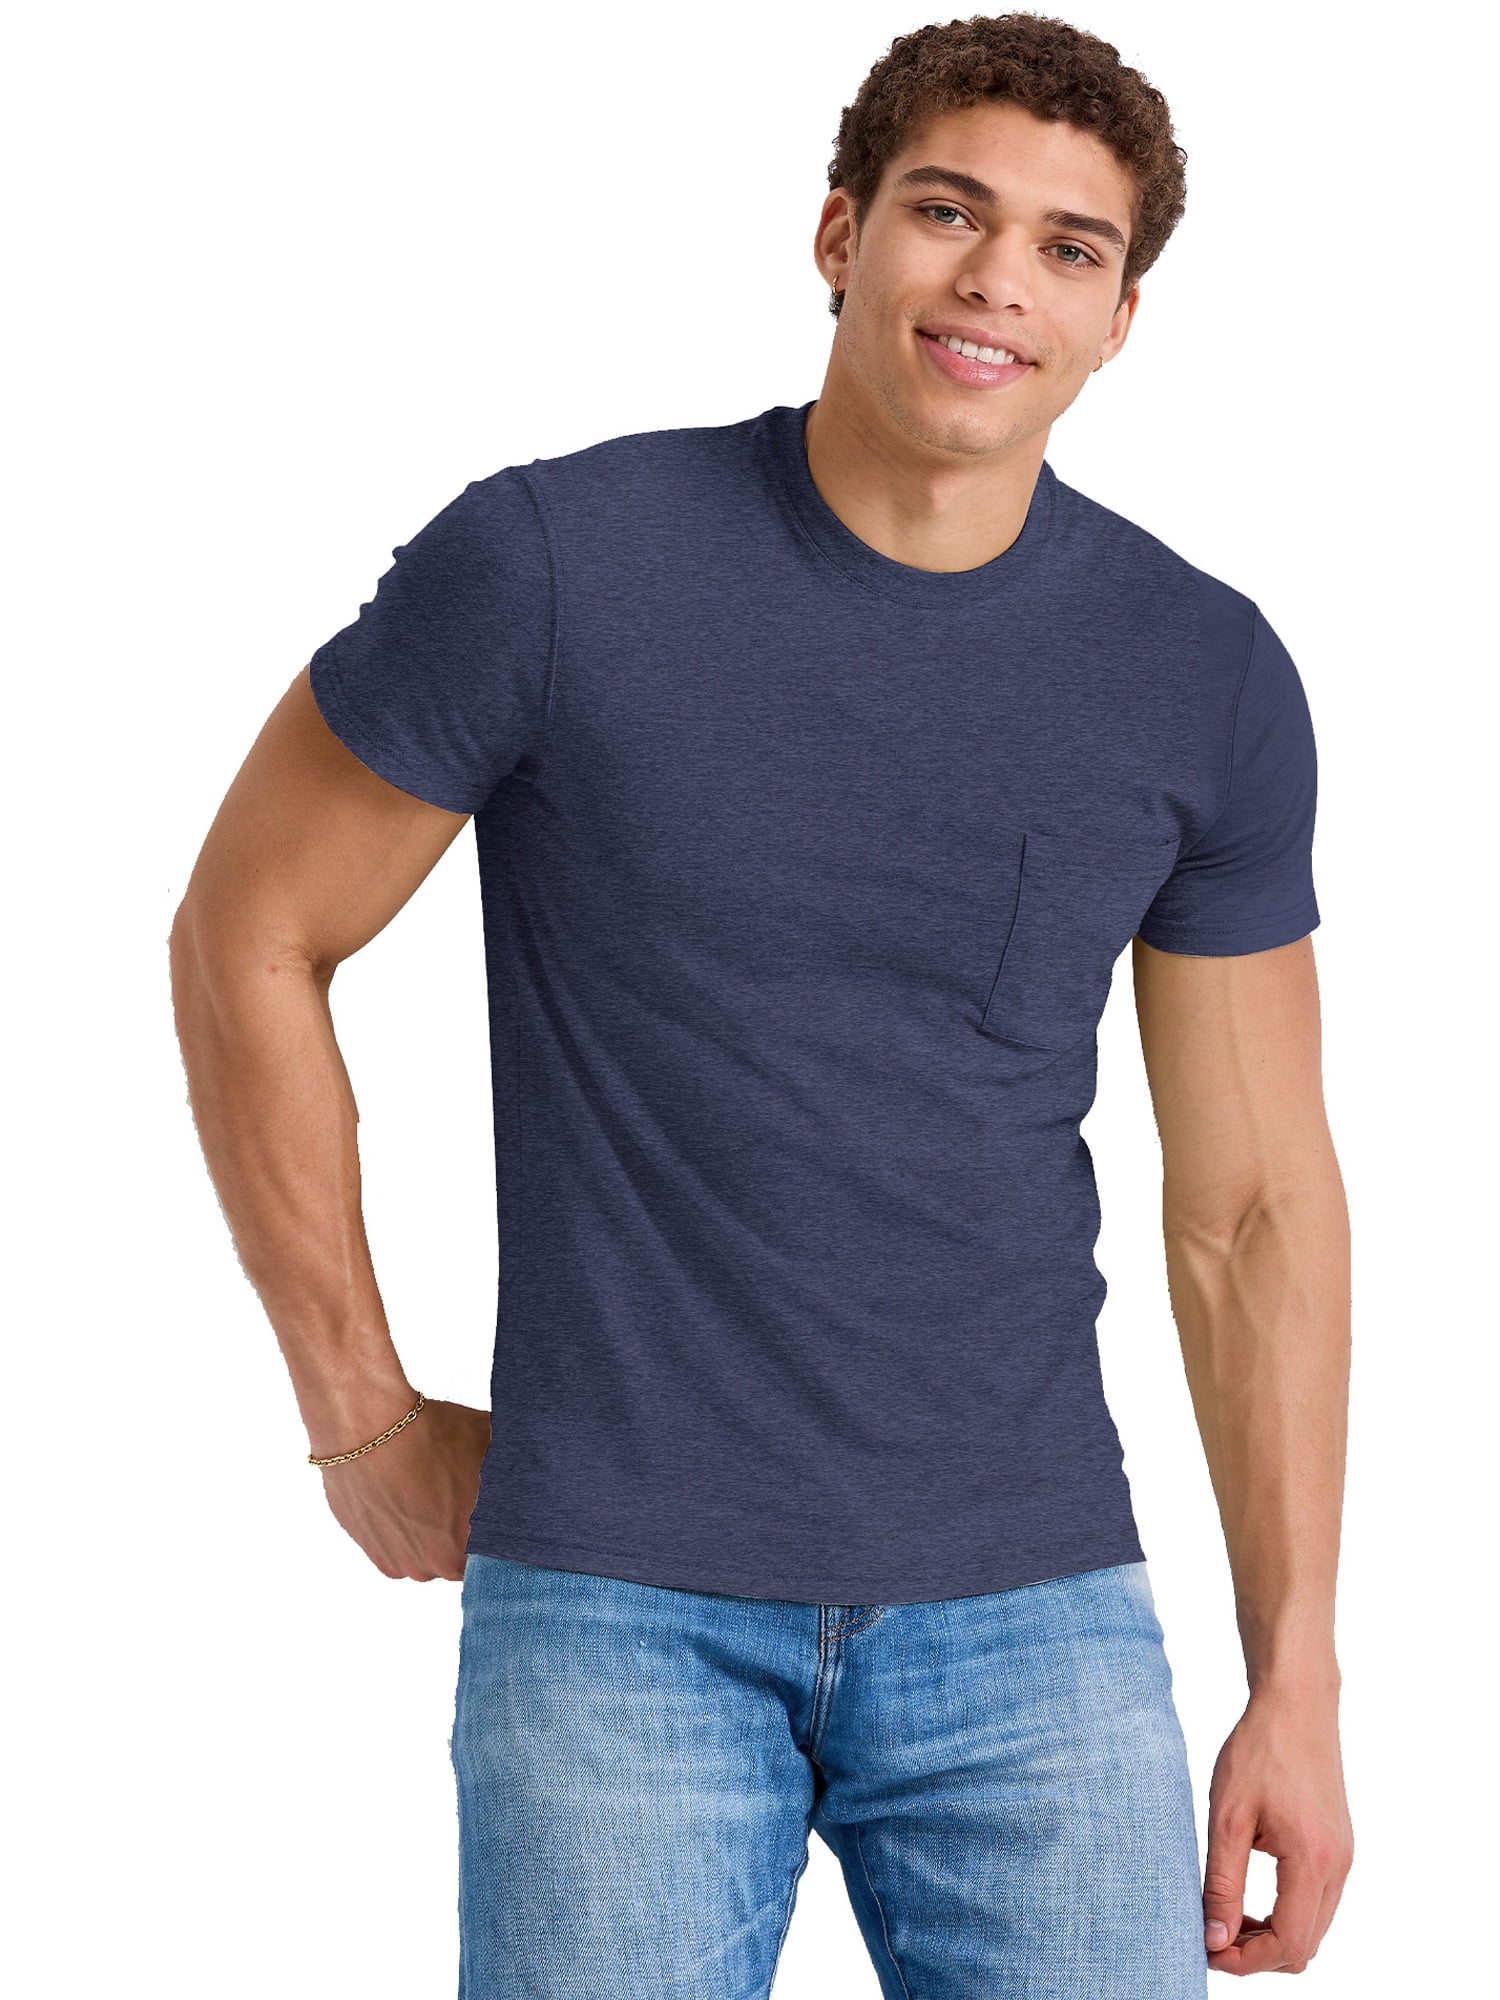 Old Navy Men's Soft-Washed chest-pocket T-Shirt - Gray - Size M